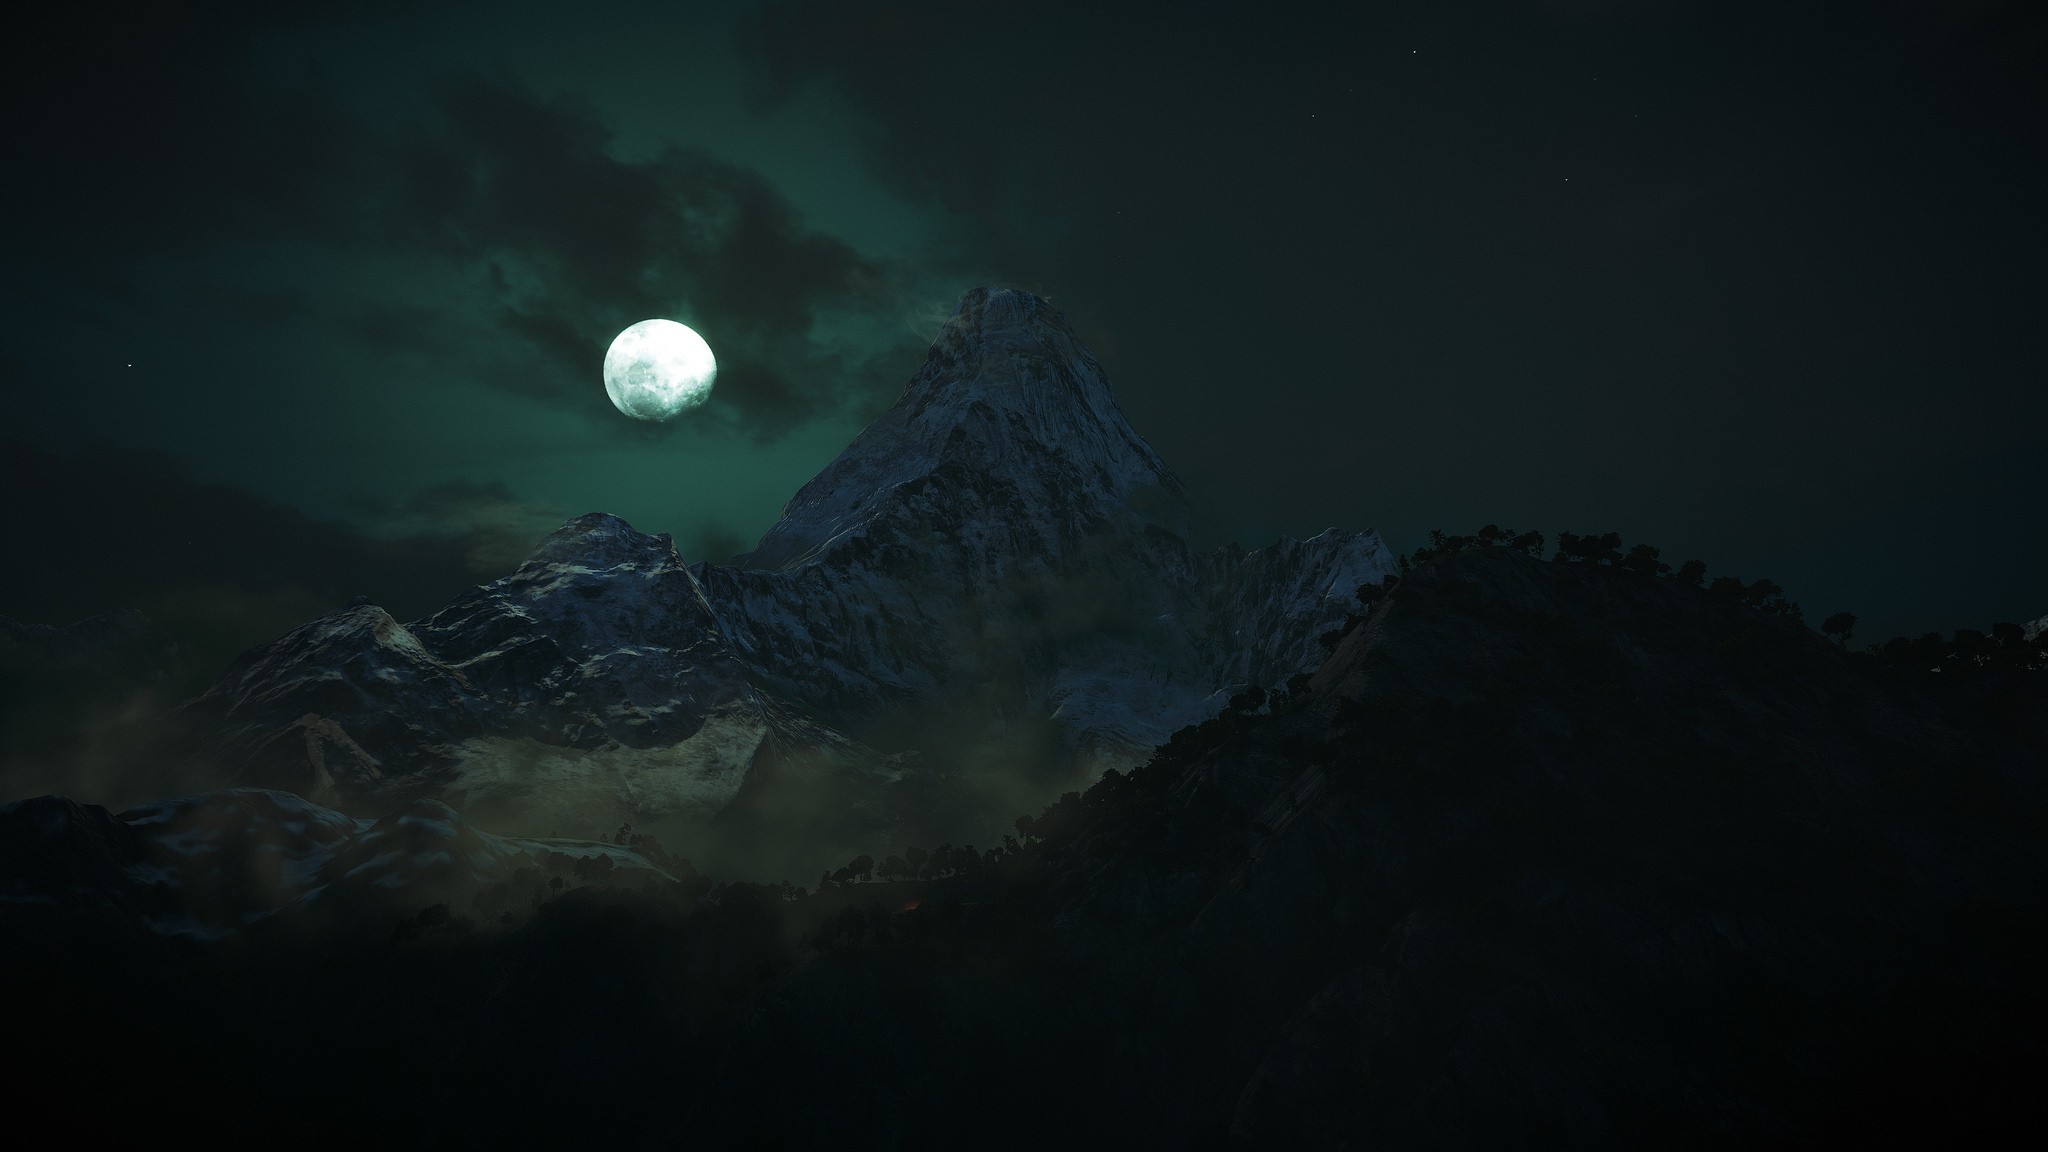 General 2048x1152 landscape dark Moon mountains sky nature night clouds